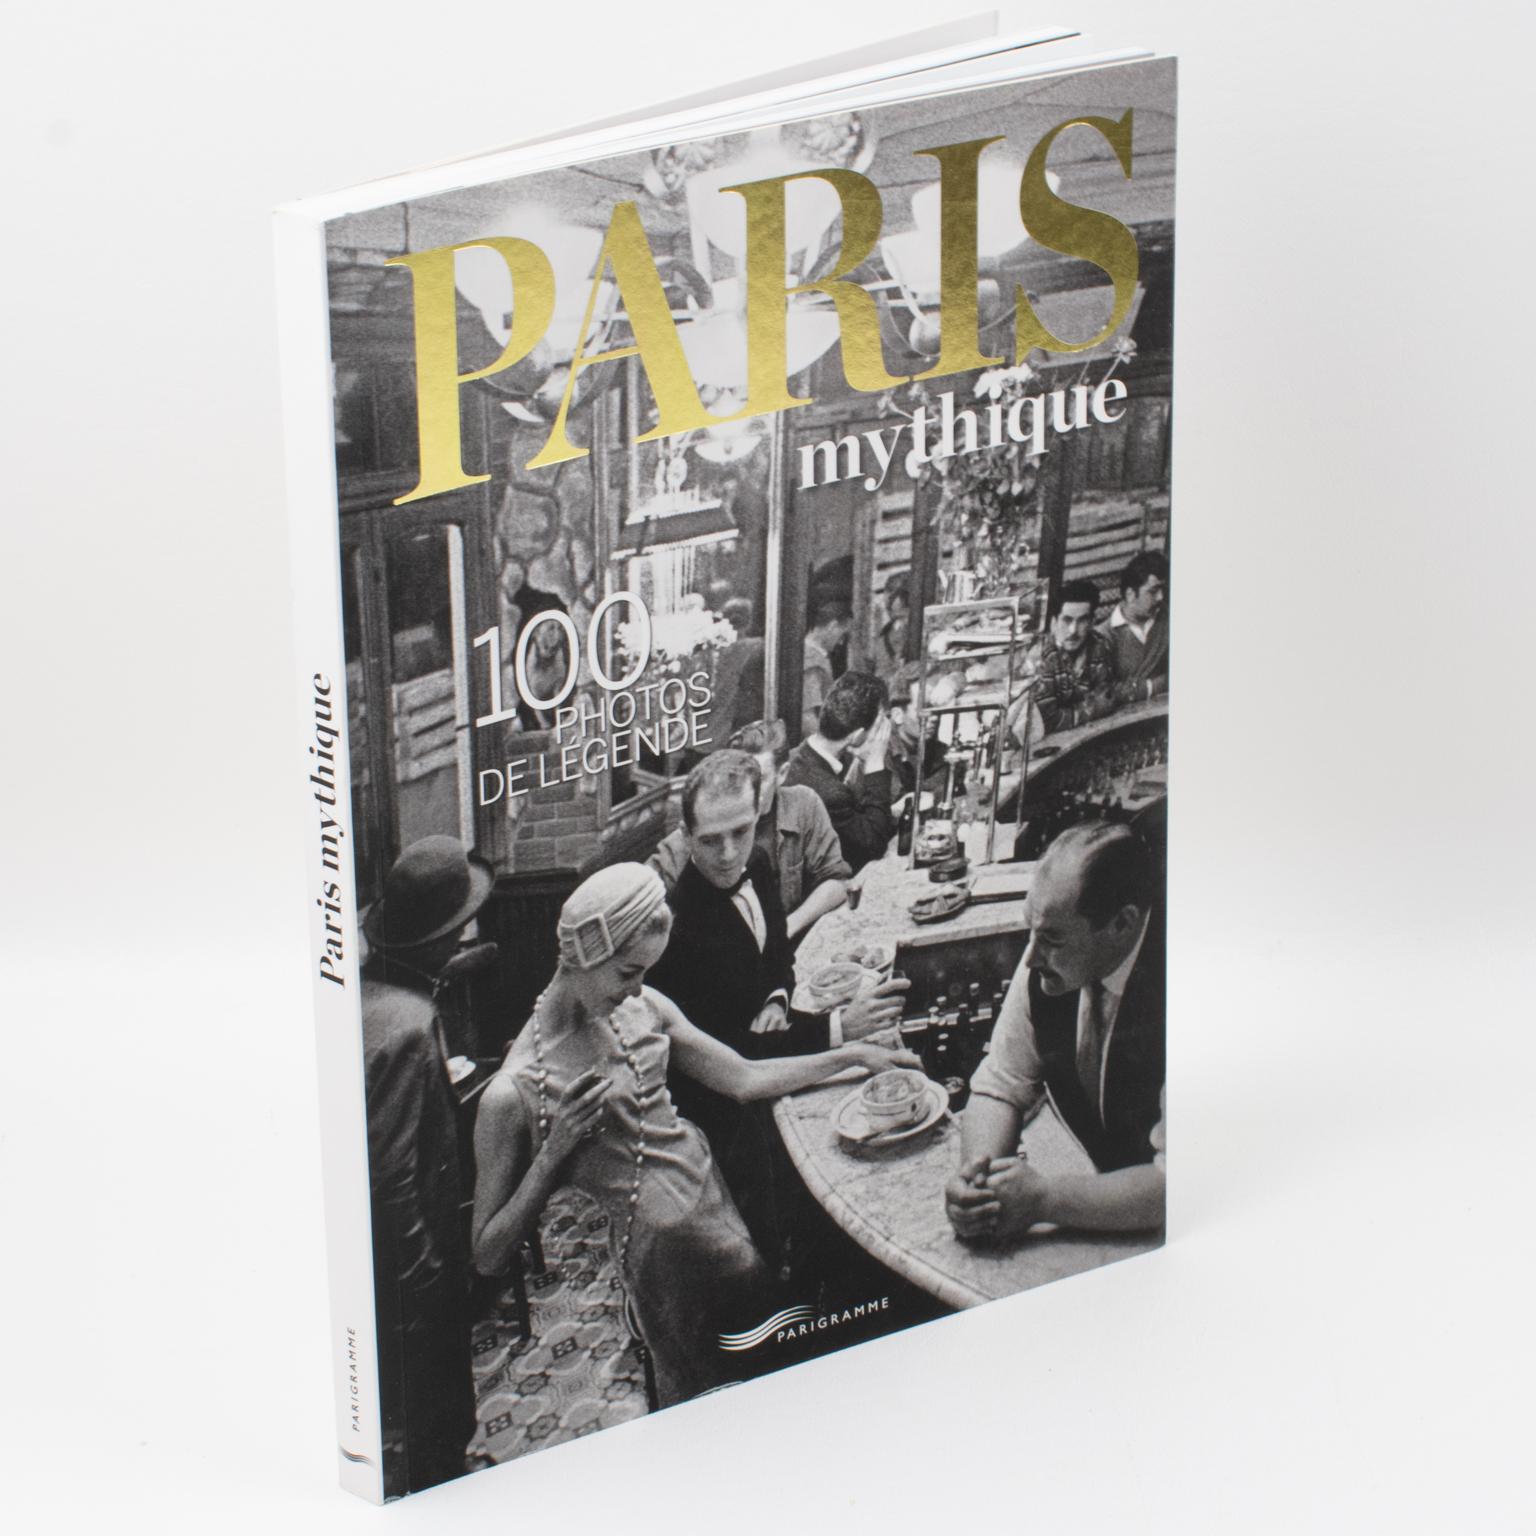 Paris Mythique, 100 Photos de Legende (Mythical Paris, 100 Legendary Photographs), French and English book published by Parigramme.
Has a city ever been photographed as much as Paris? The greatest have tirelessly drawn the portrait, striving to